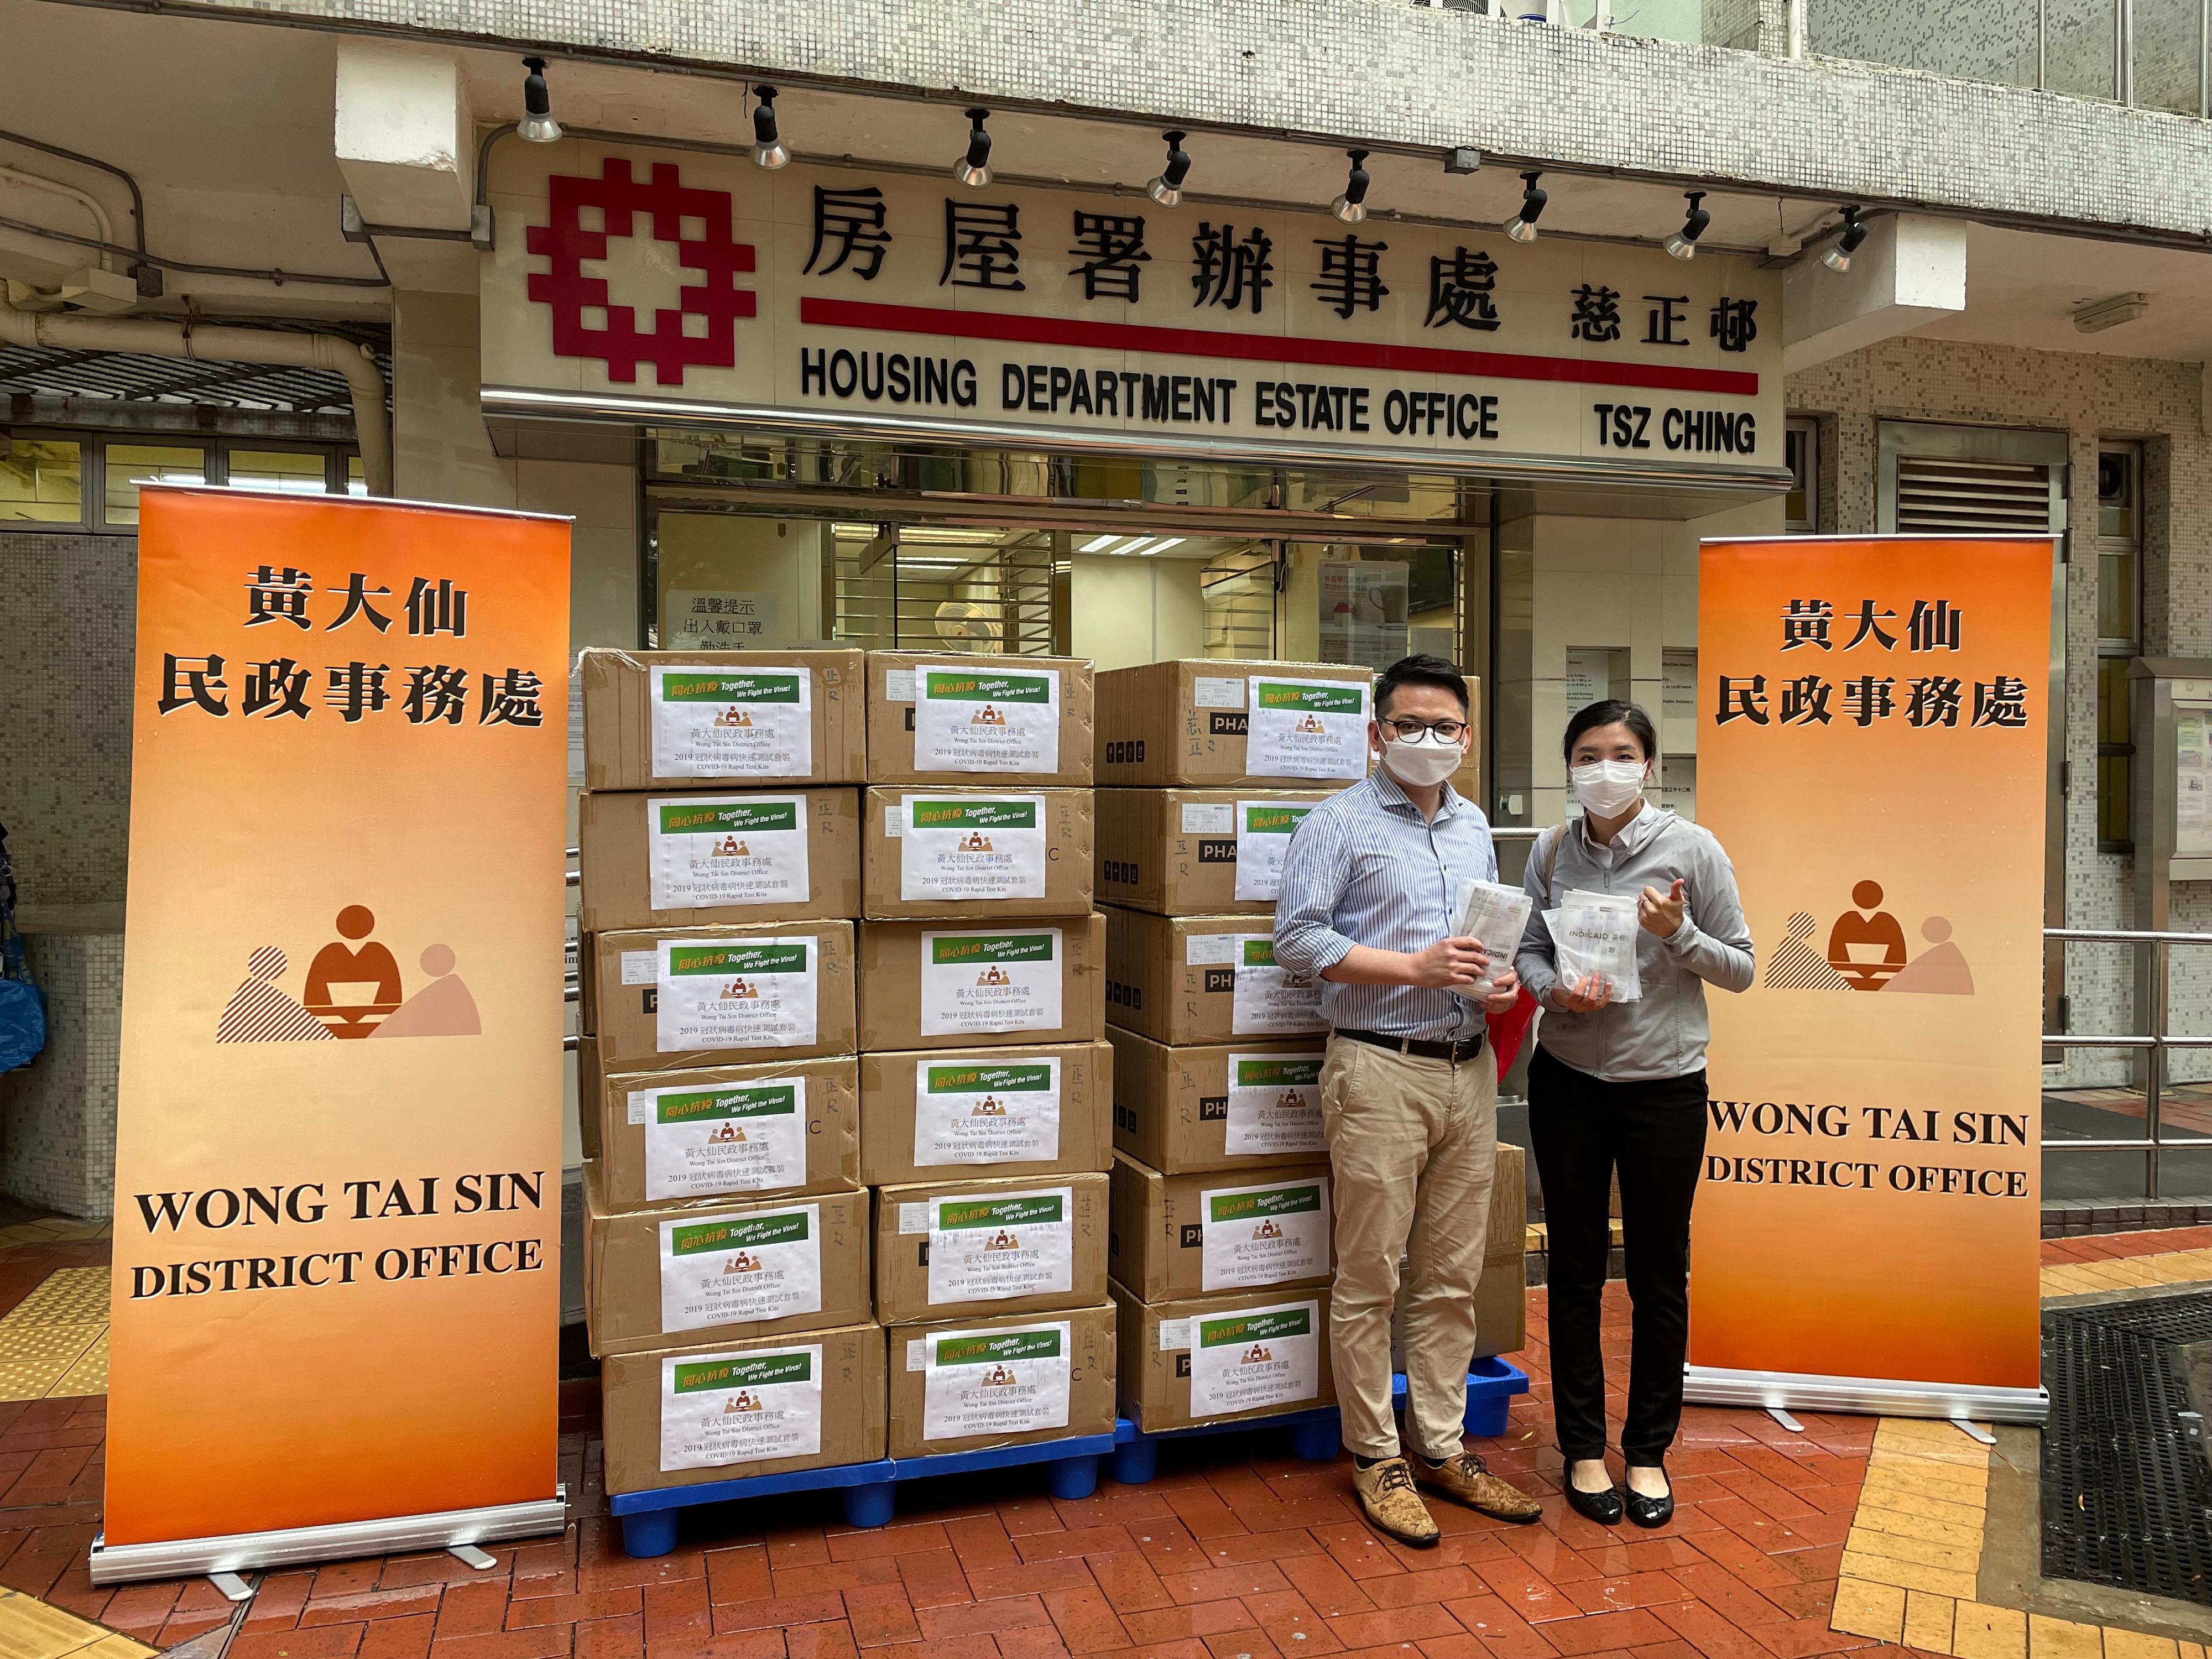 The Wong Tai Sin District Office today (March 23) distributed COVID-19 rapid test kits to households, cleansing workers and property management staff living and working in Tsz Ching Estate for voluntary testing through the Housing Department and the property management company.